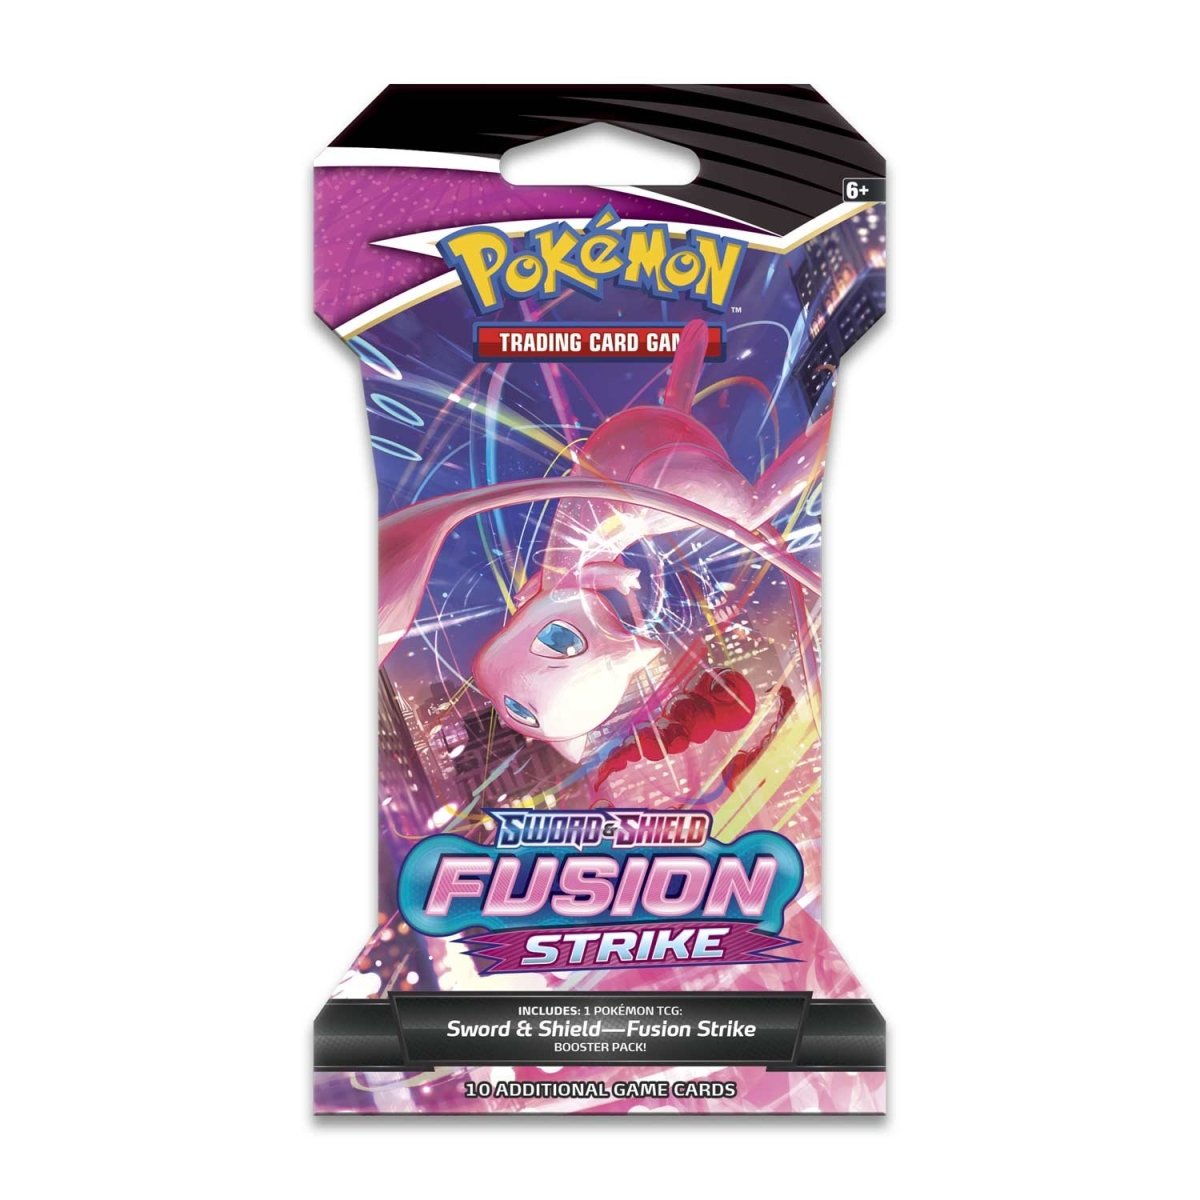 Pokémon TCG Sword & Shield Fusion Strike Sleeved Booster Pack 10 CardsA visual representation of a Pokémon TCG: Sword & Shield—Fusion Strike Sleeved Booster Pack. It signifies the limitless potential of fusion strike styles with potent Pokémon V like Genesect V, Hoopa V, and Mew VMAX. The pack includes 10 trading cards and a basic energy card.